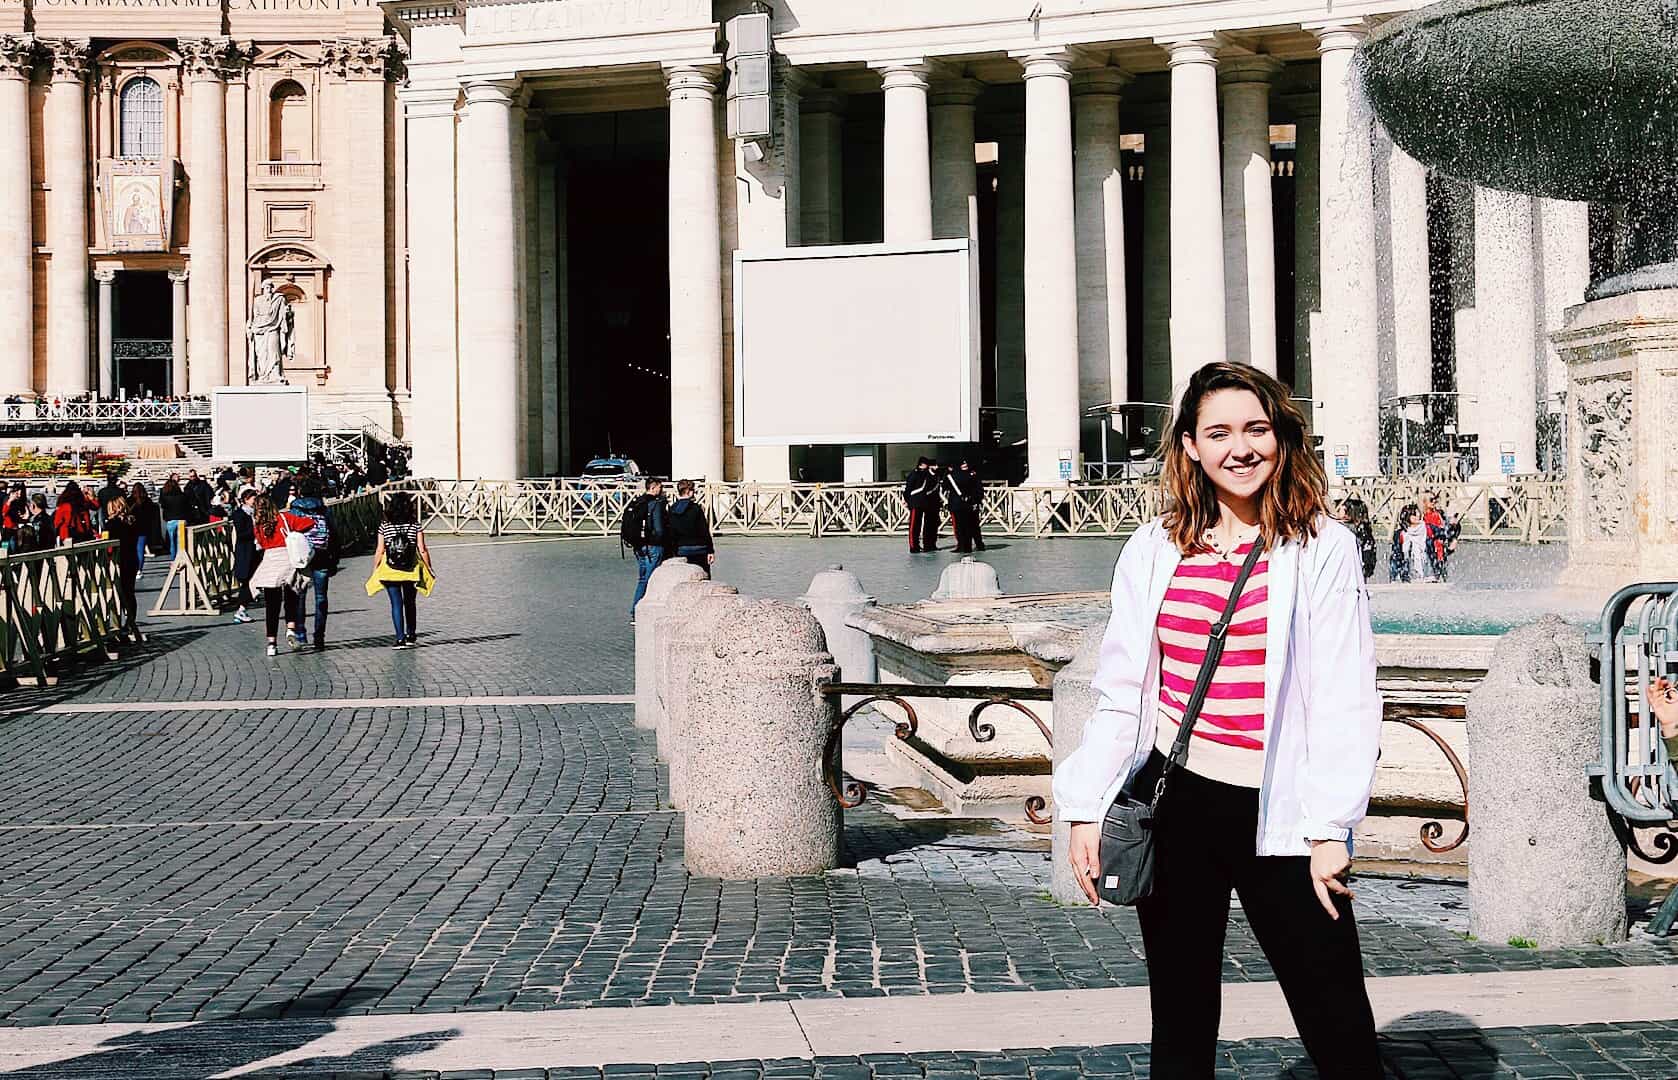 JWU student Katelyn Colantonio in front of a fountain in Rome